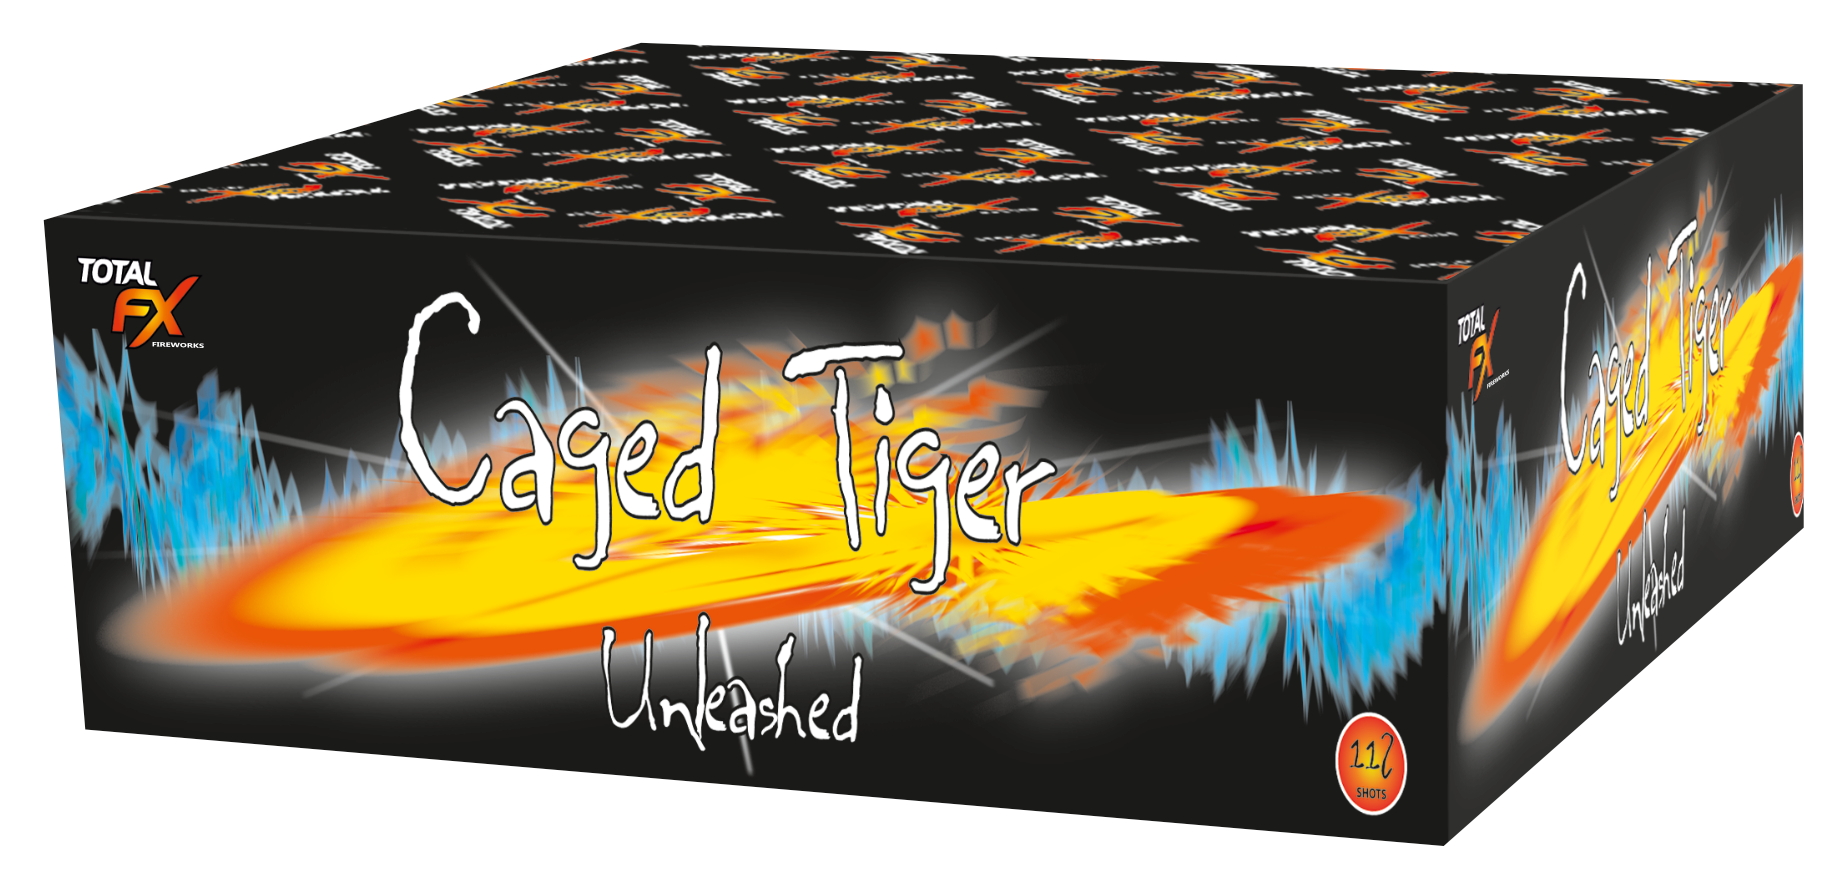 Caged Tiger Unleased - 